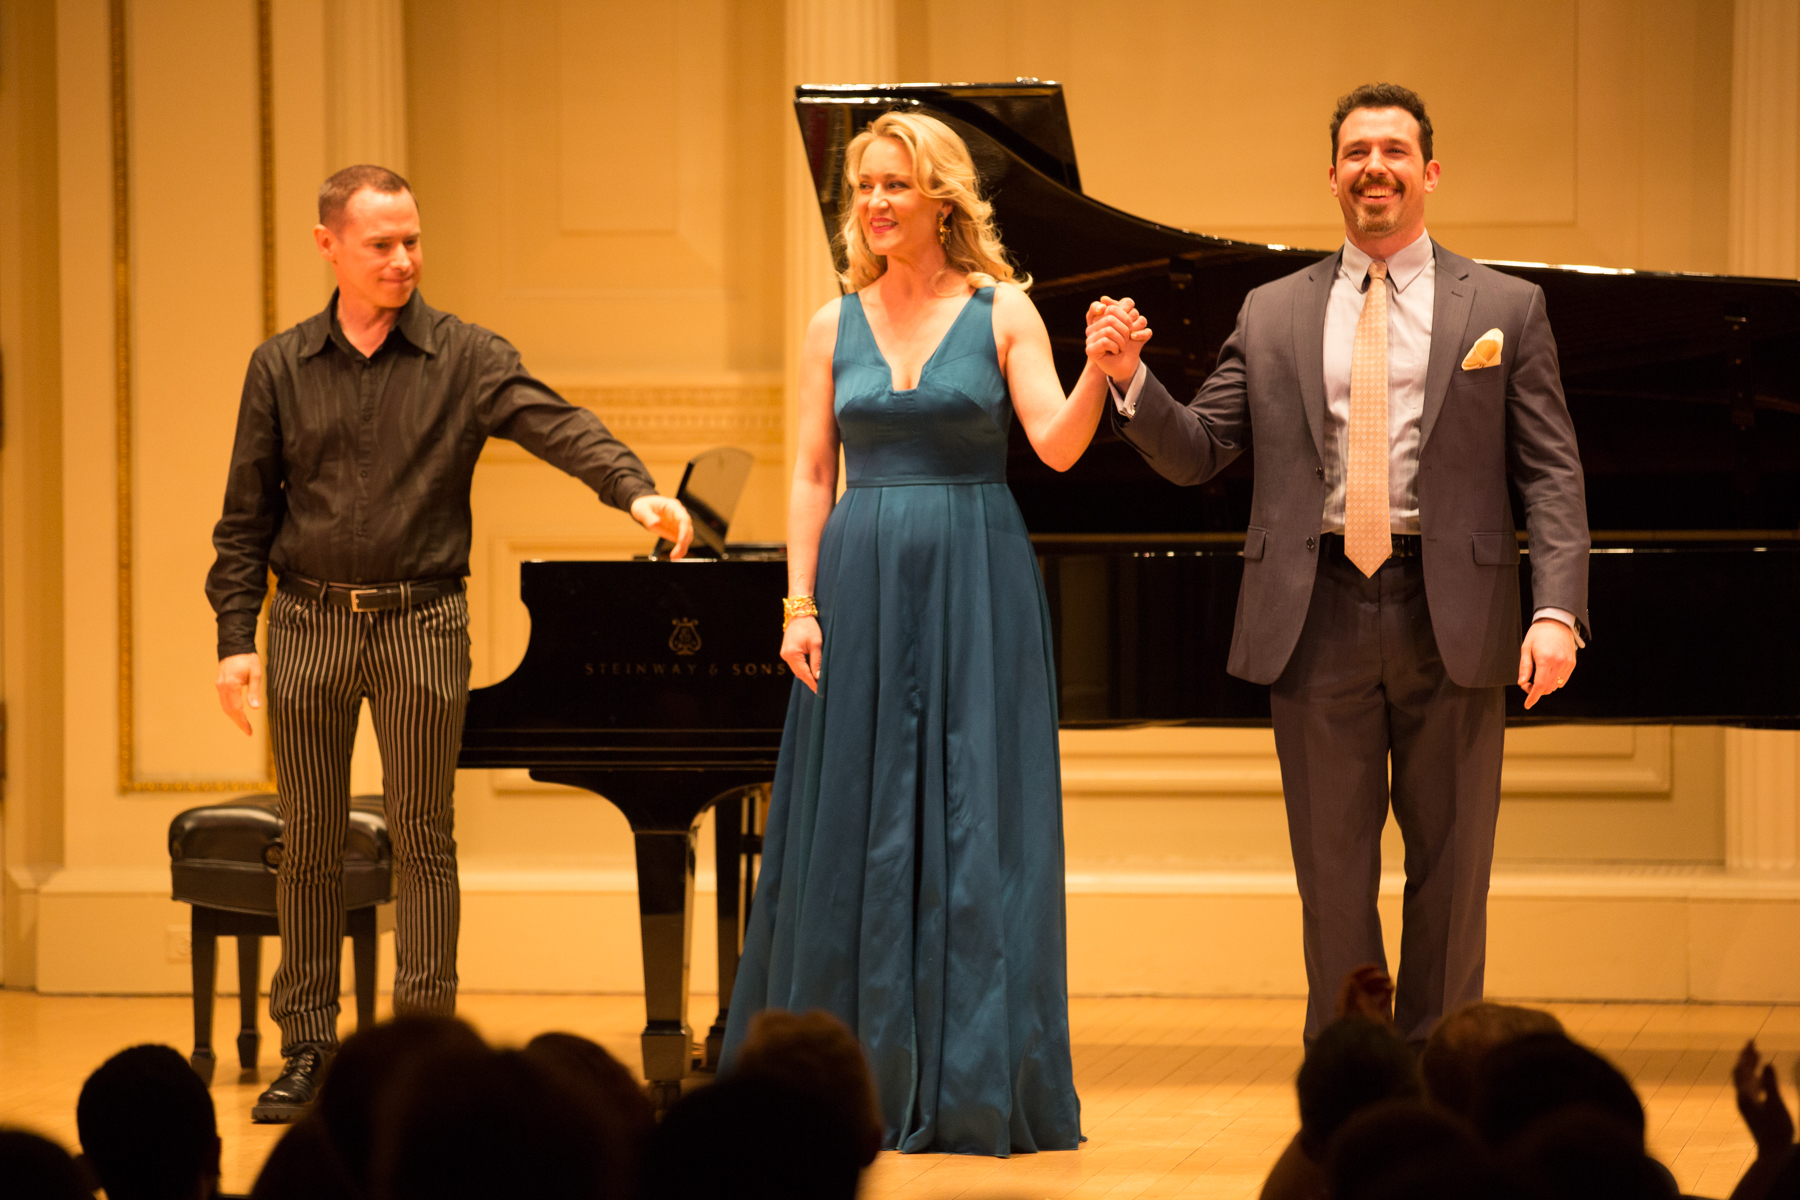 ame-2018-carnegie-hall-vocal-music-of-robert-patersonDG9A7869.jpg